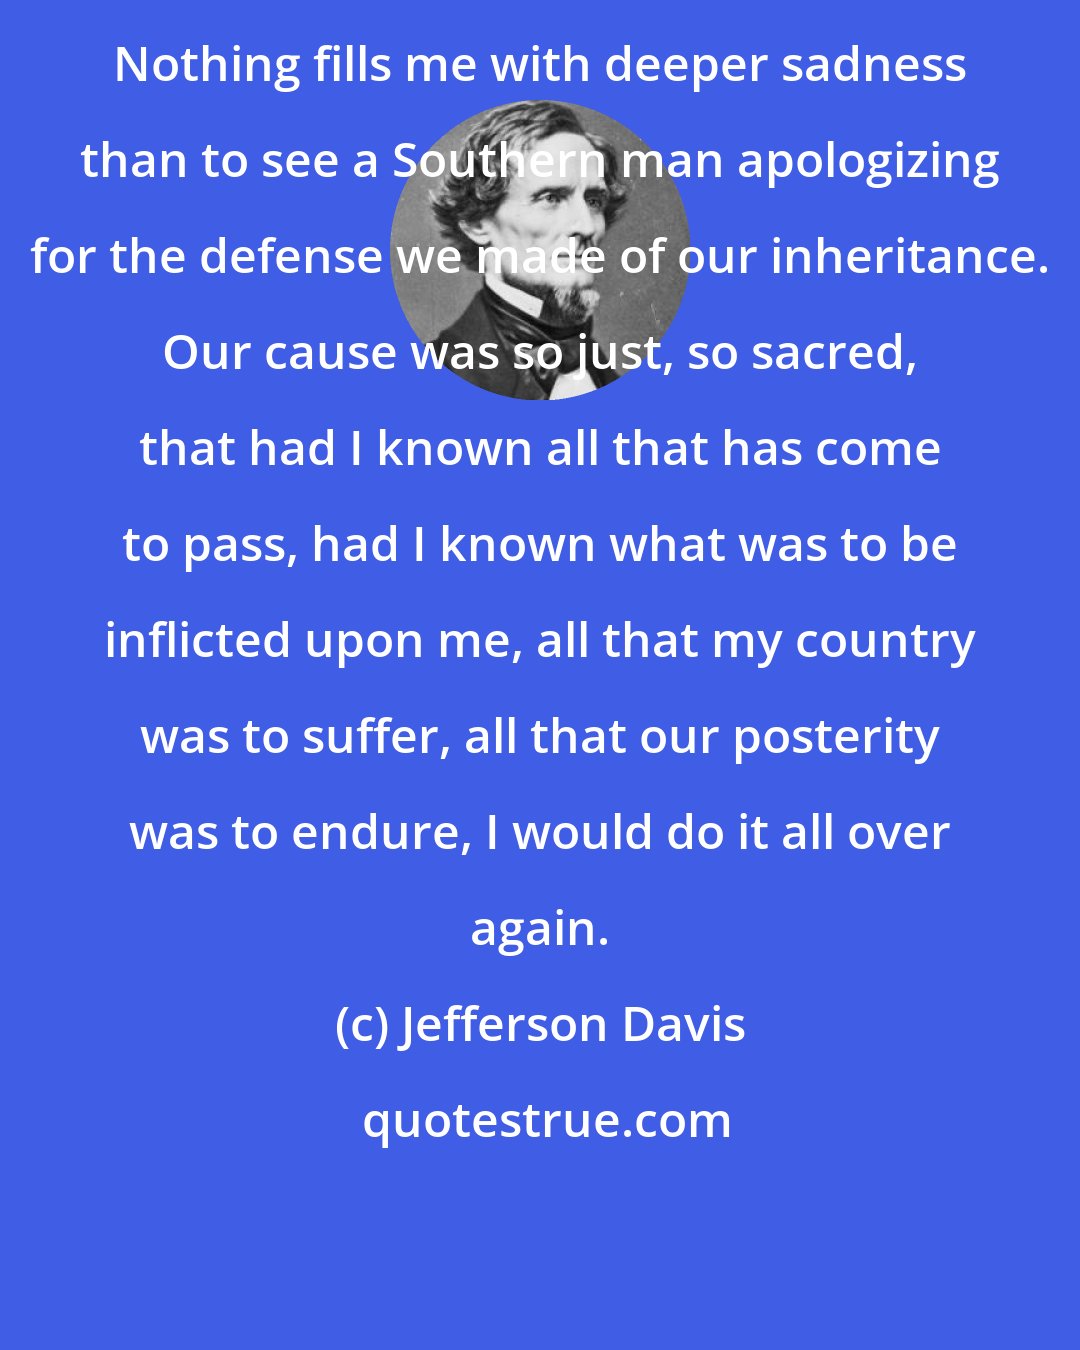 Jefferson Davis: Nothing fills me with deeper sadness than to see a Southern man apologizing for the defense we made of our inheritance. Our cause was so just, so sacred, that had I known all that has come to pass, had I known what was to be inflicted upon me, all that my country was to suffer, all that our posterity was to endure, I would do it all over again.